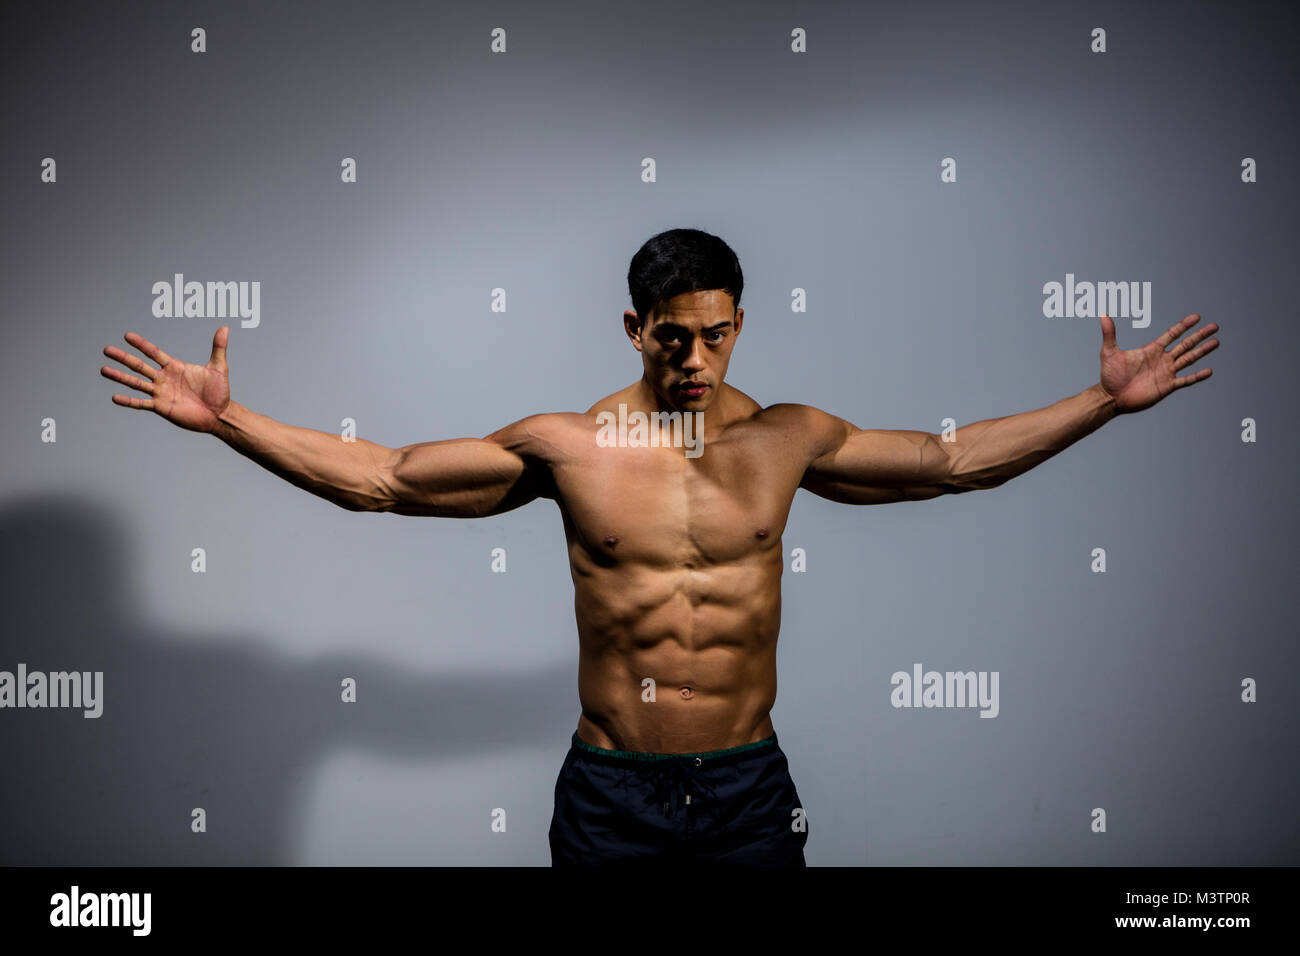 https://c8.alamy.com/comp/M3TP0R/an-asian-fitness-model-displays-his-biceps-and-pectoral-muscles-by-M3TP0R.jpg